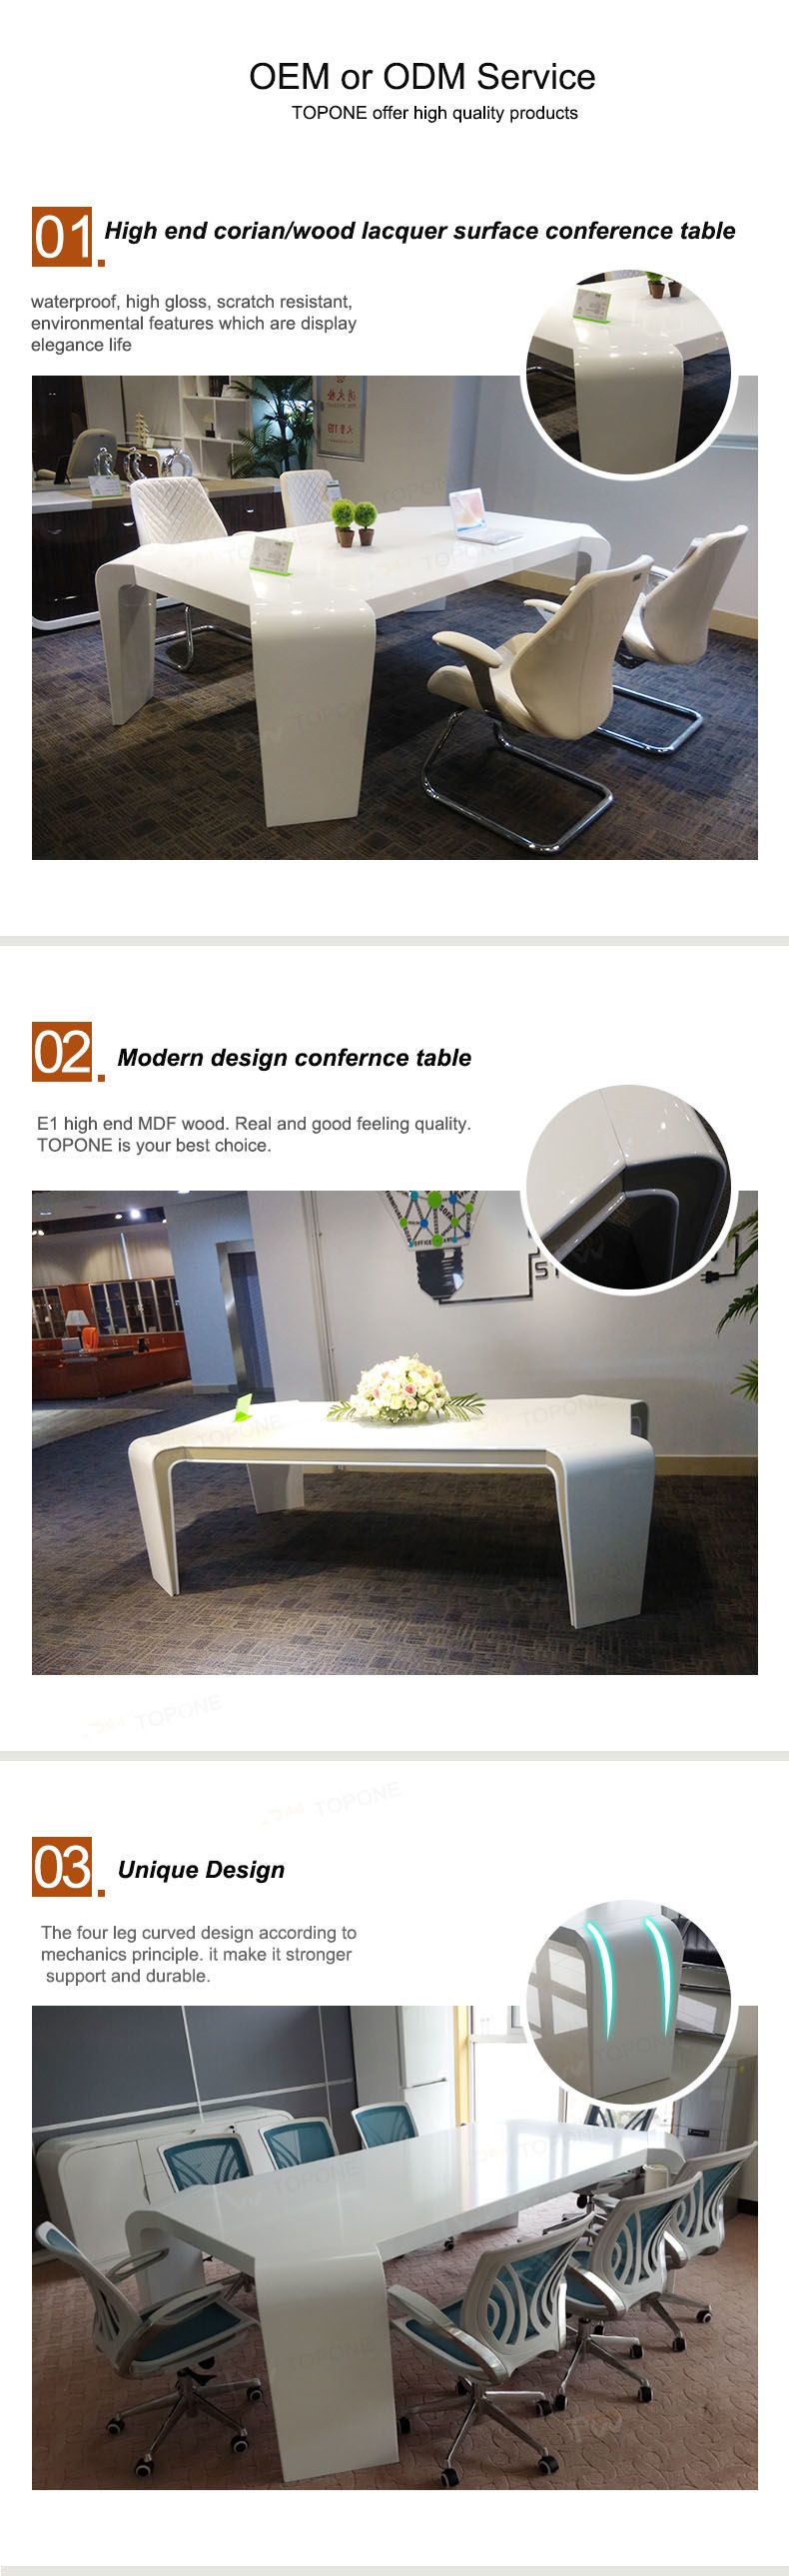 corian conference table new design.jpg